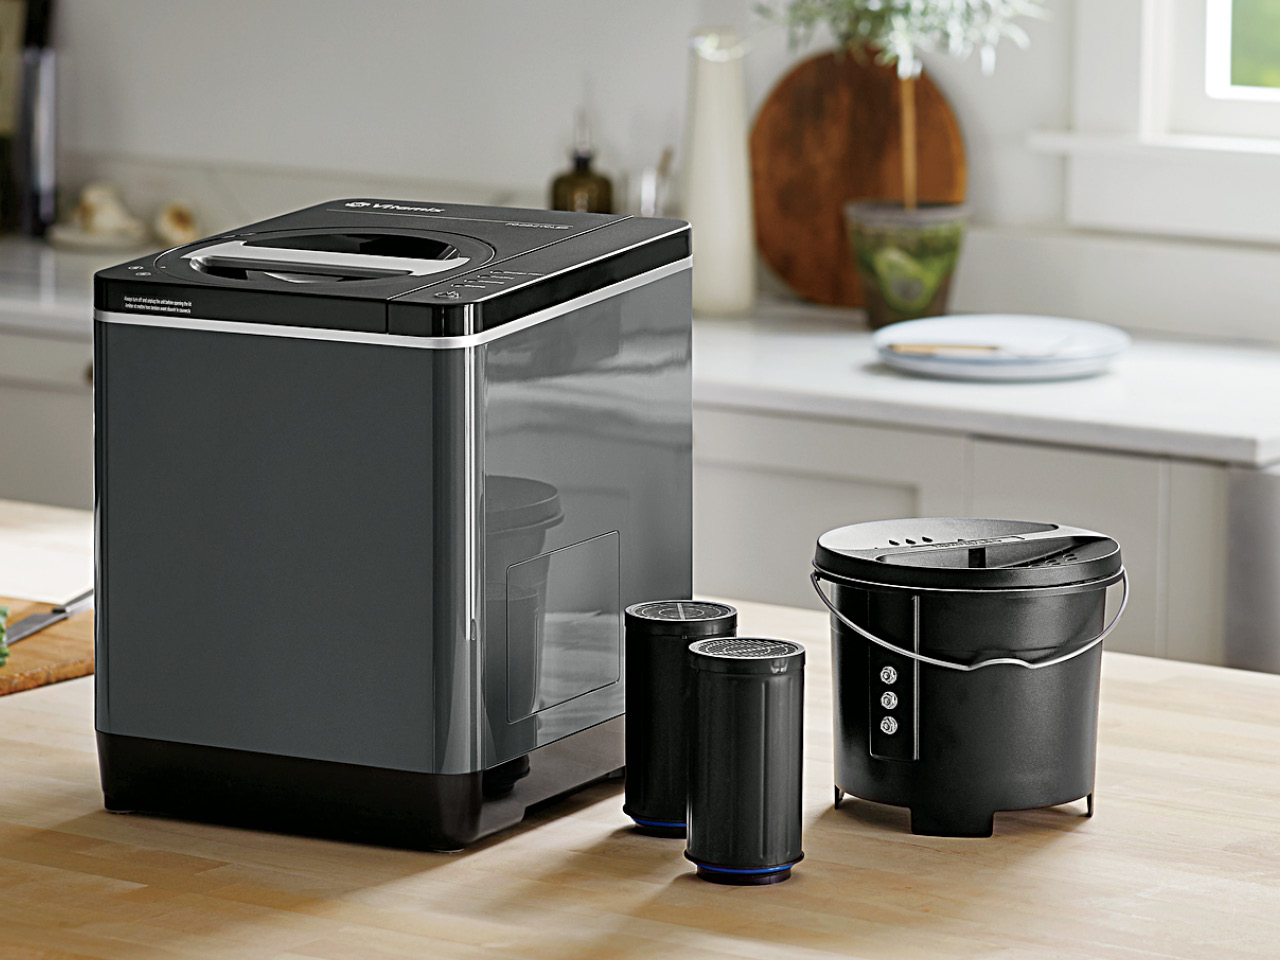 The best countertop composters: the Vitamix Foodcycler resting on a kitchen counter